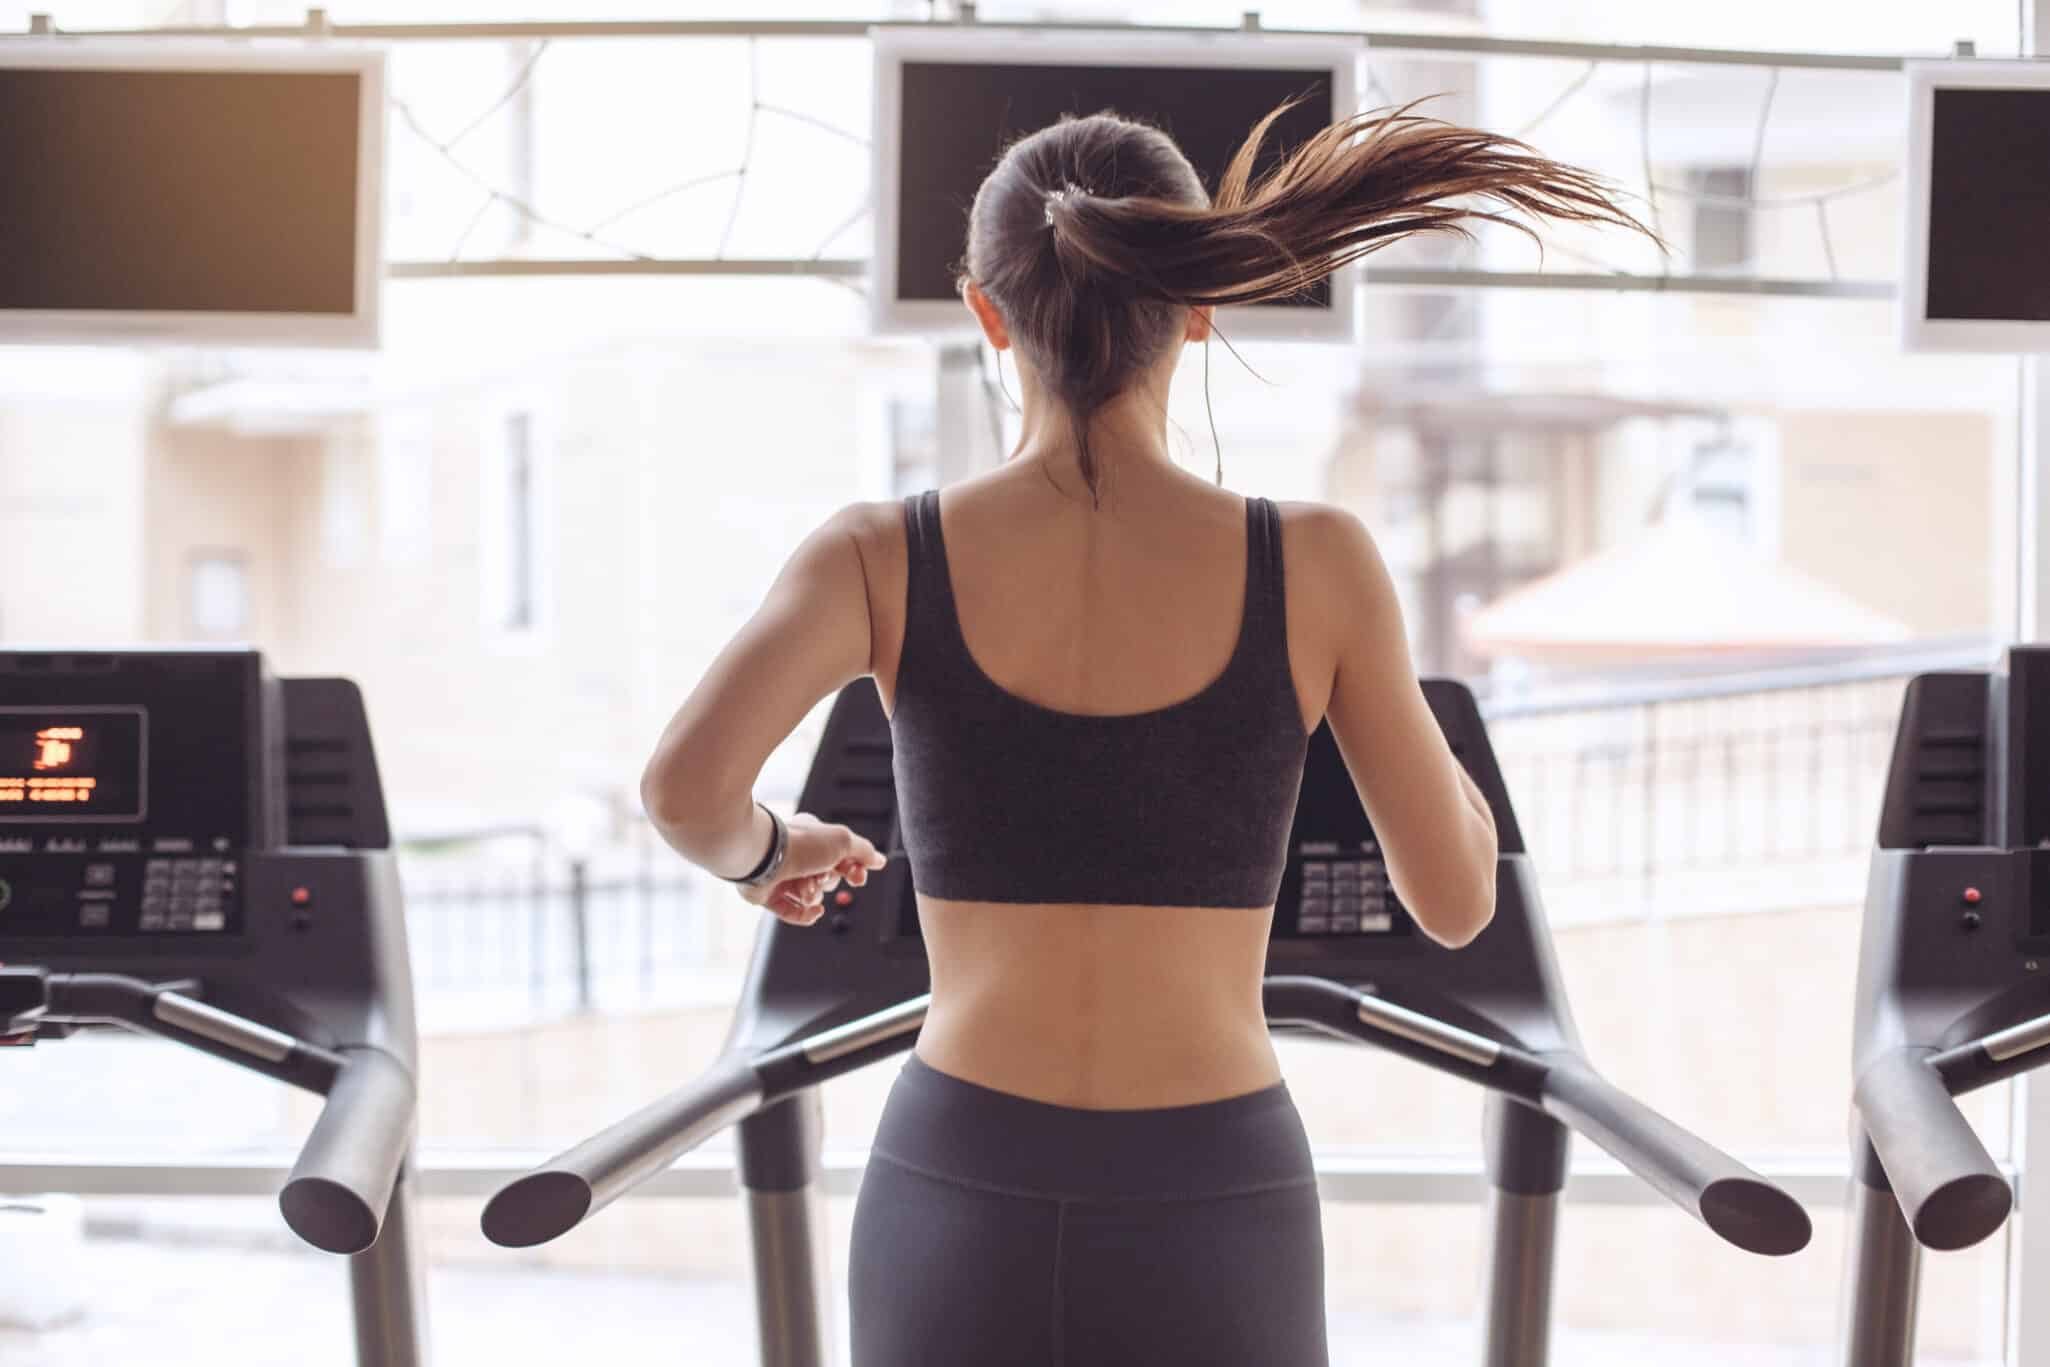 Exercising After Breast Augmentation Surgery